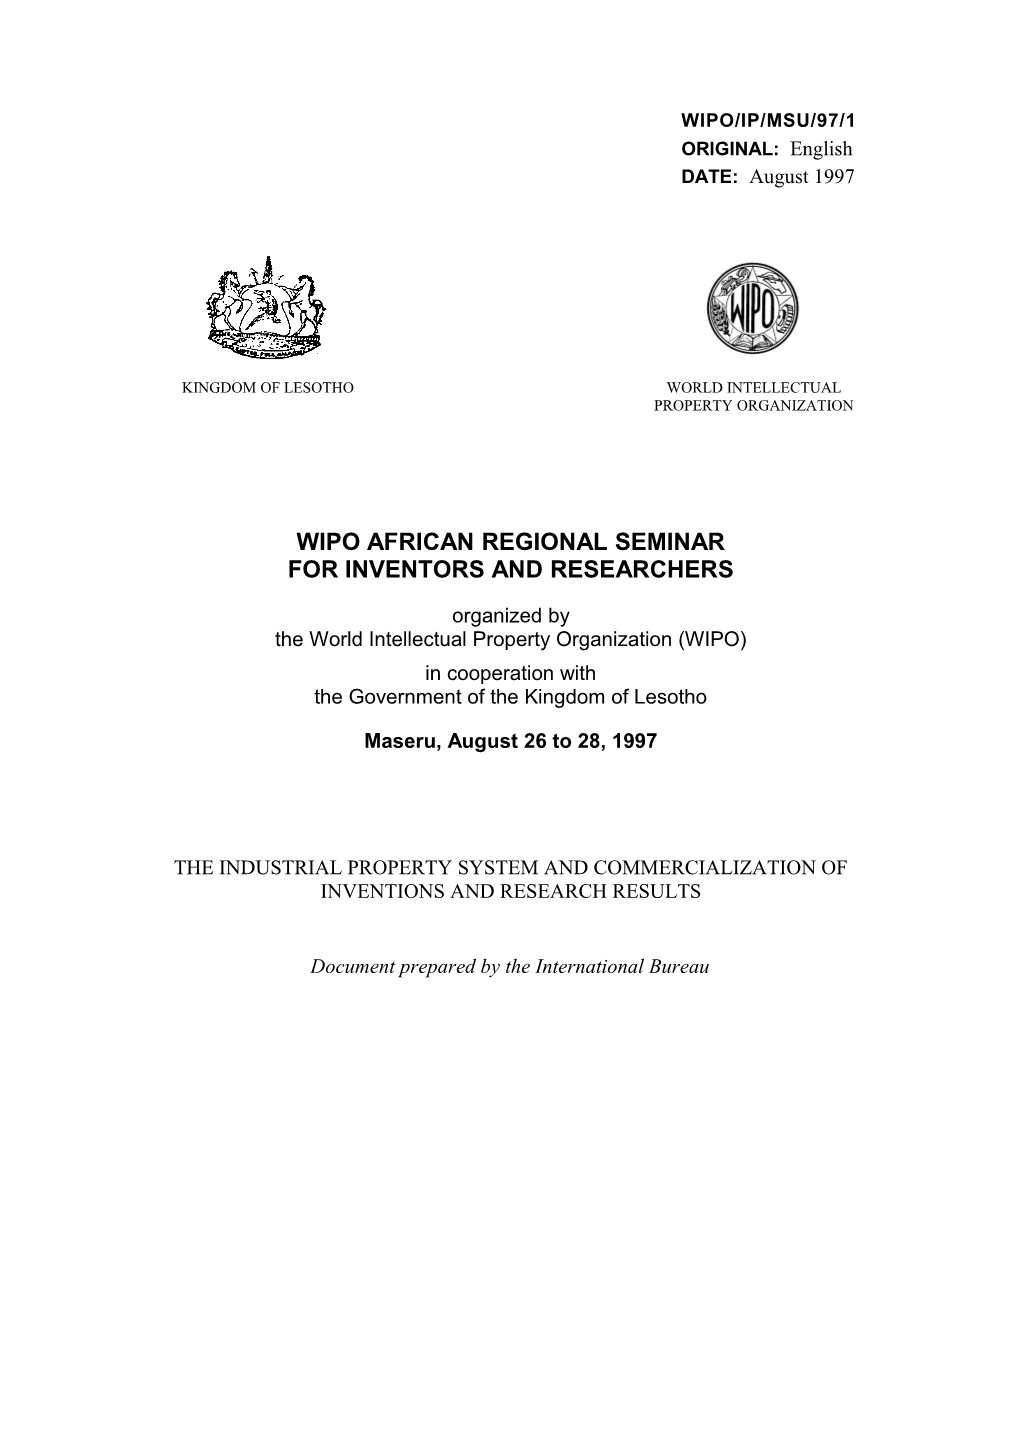 WIPO/IP/MSU/97/1: the Industrial Property System and Commercialization of Inventions And